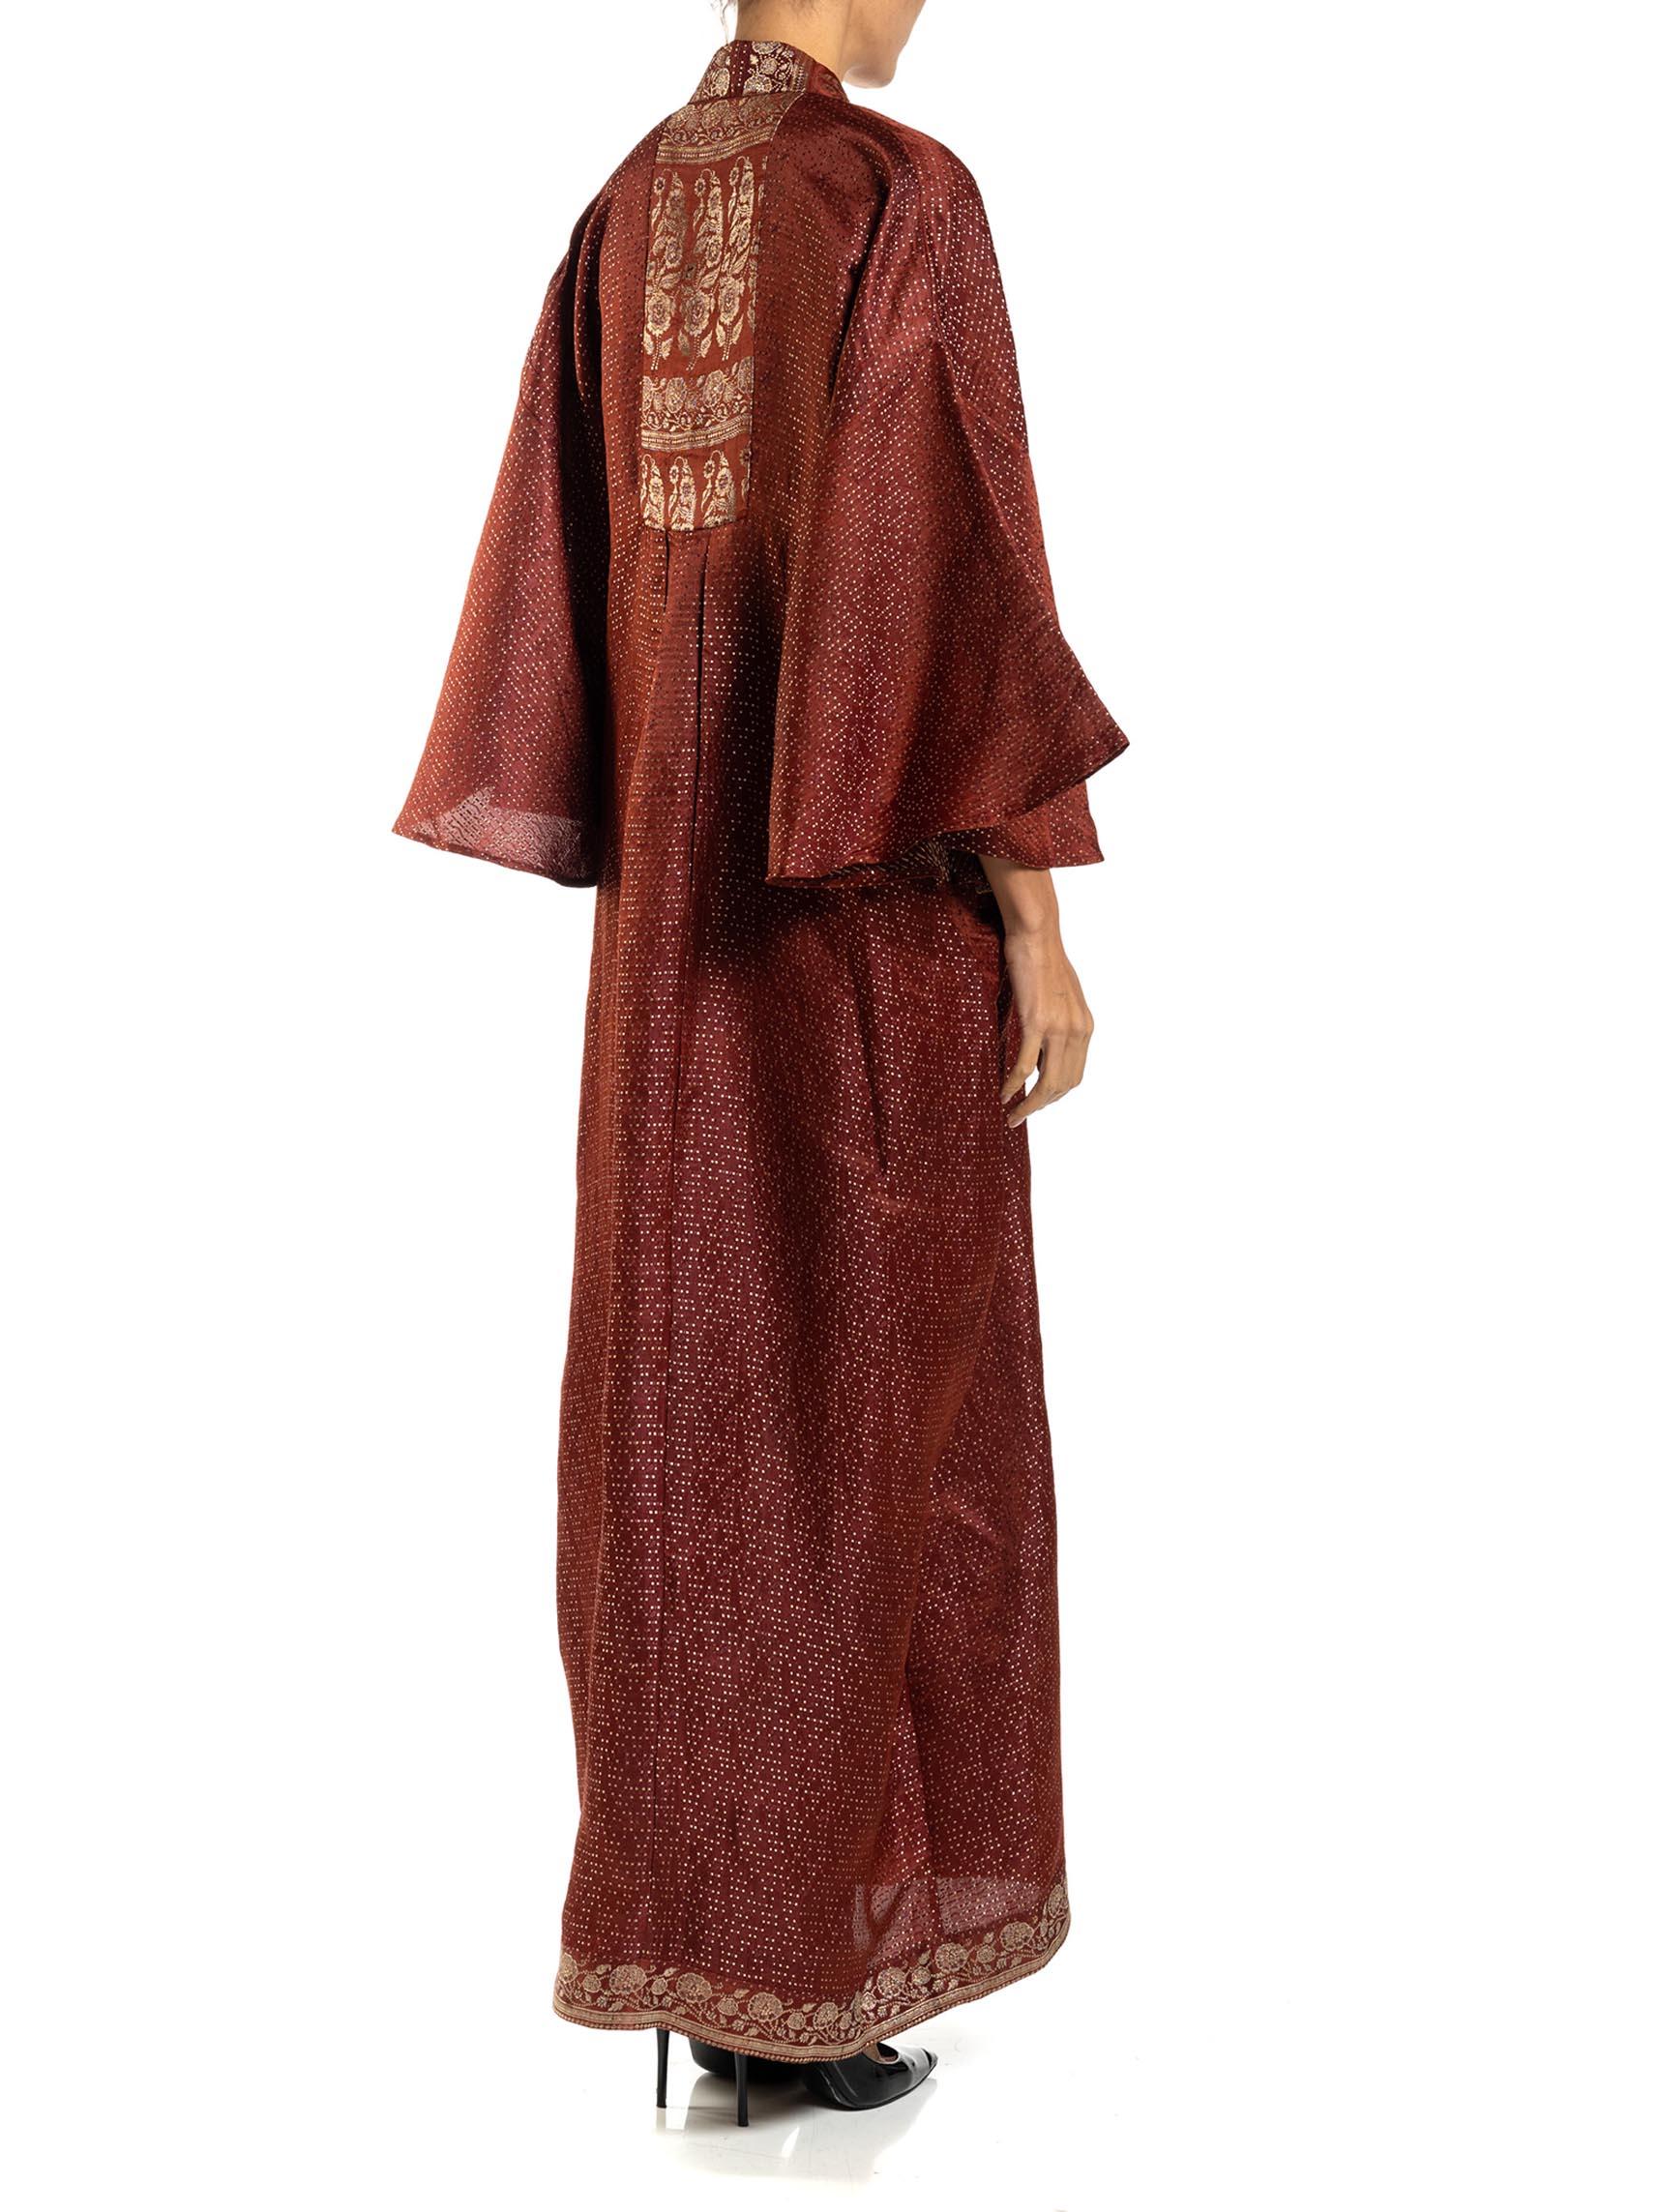 MORPHEW COLLECTION Burgundy Floral Silk Checkered Kaftan Made From Vintage Sari For Sale 6